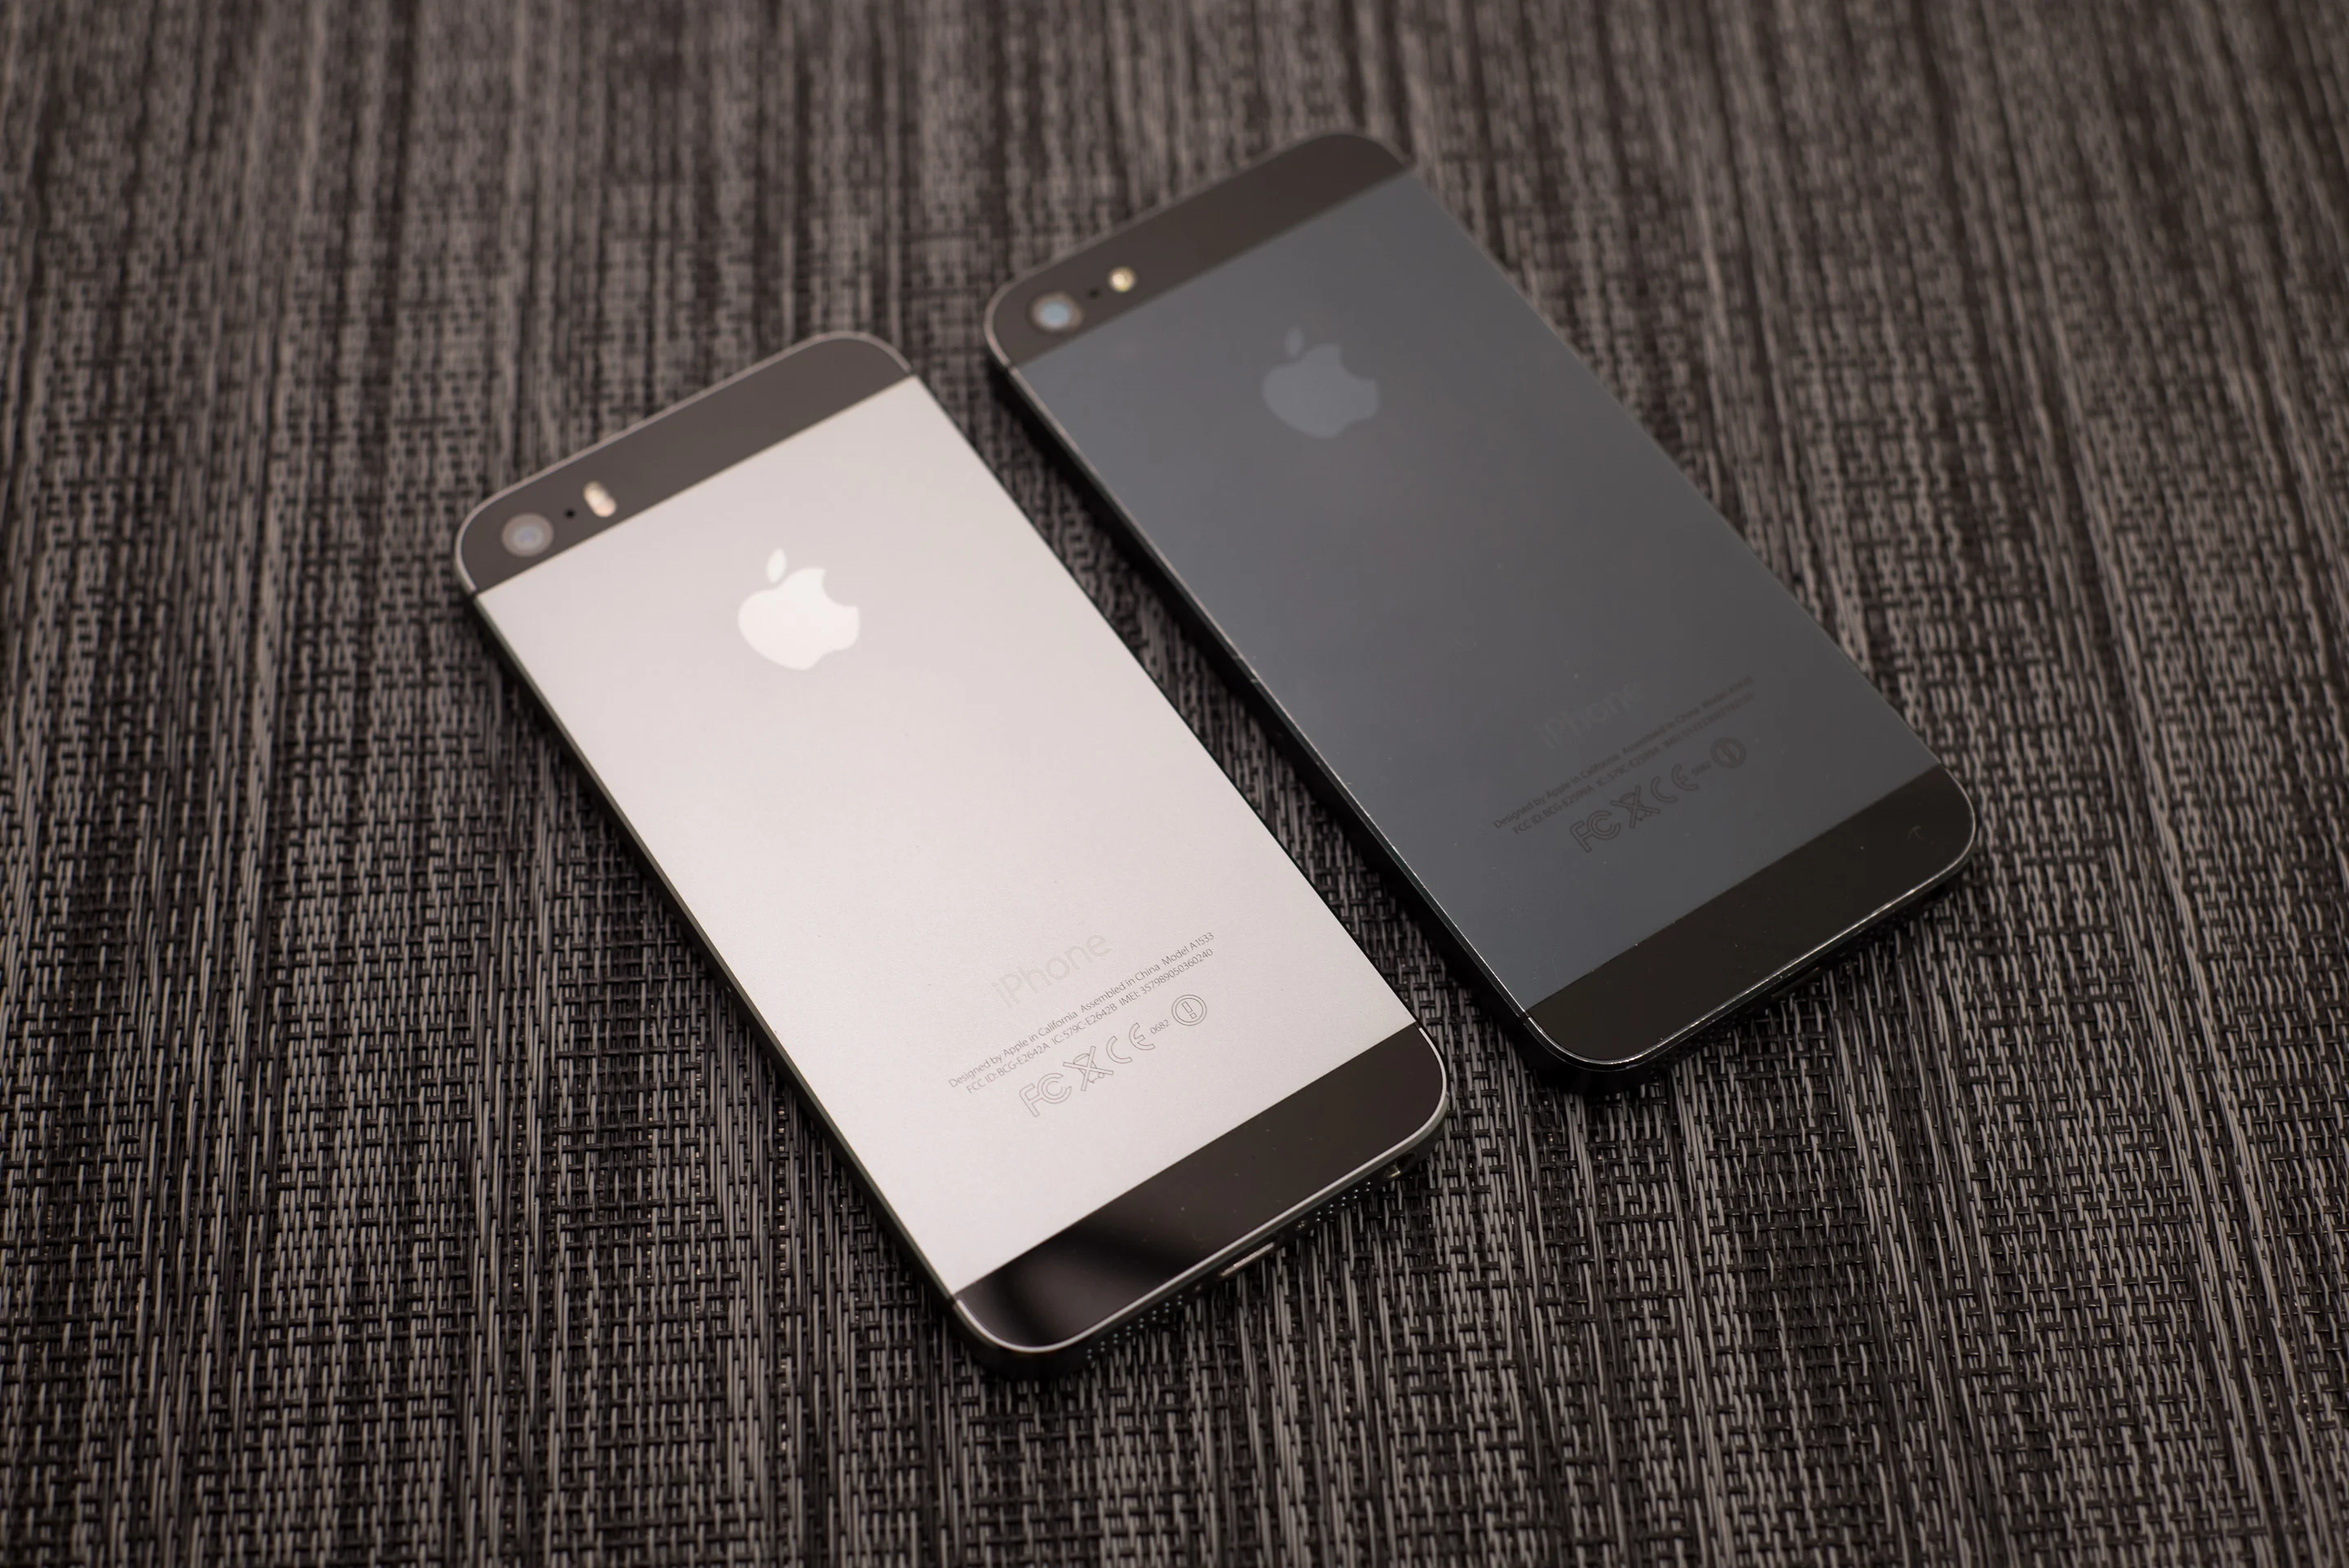 An unexpected release of software updates for the iPhone 5s and a number of other “oldies” took place